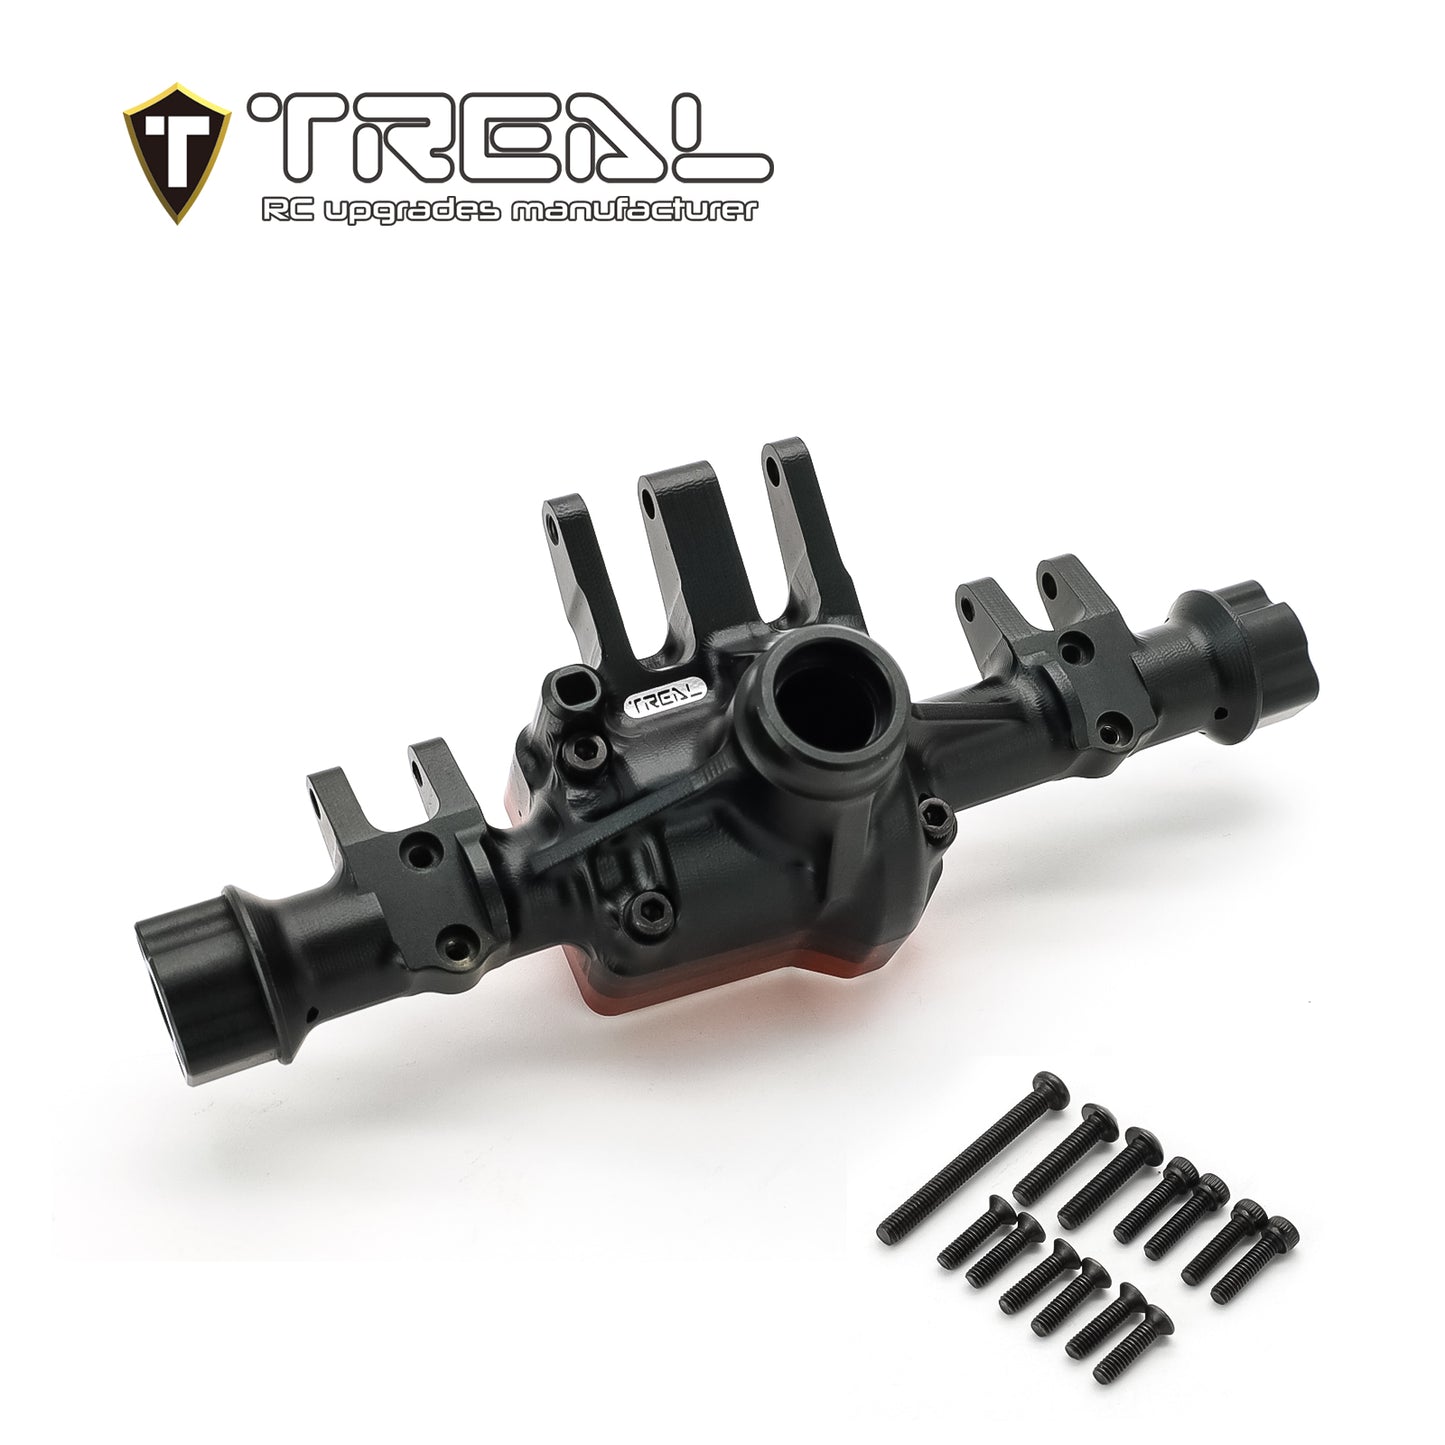 TREAL TRX-6 Rear Axle Housing, Aluminum 7075 CNC Billet Middle Axle Housing, with Differential Cover for TRX6 G 63, TRX-6 Ultimate RC Hauler